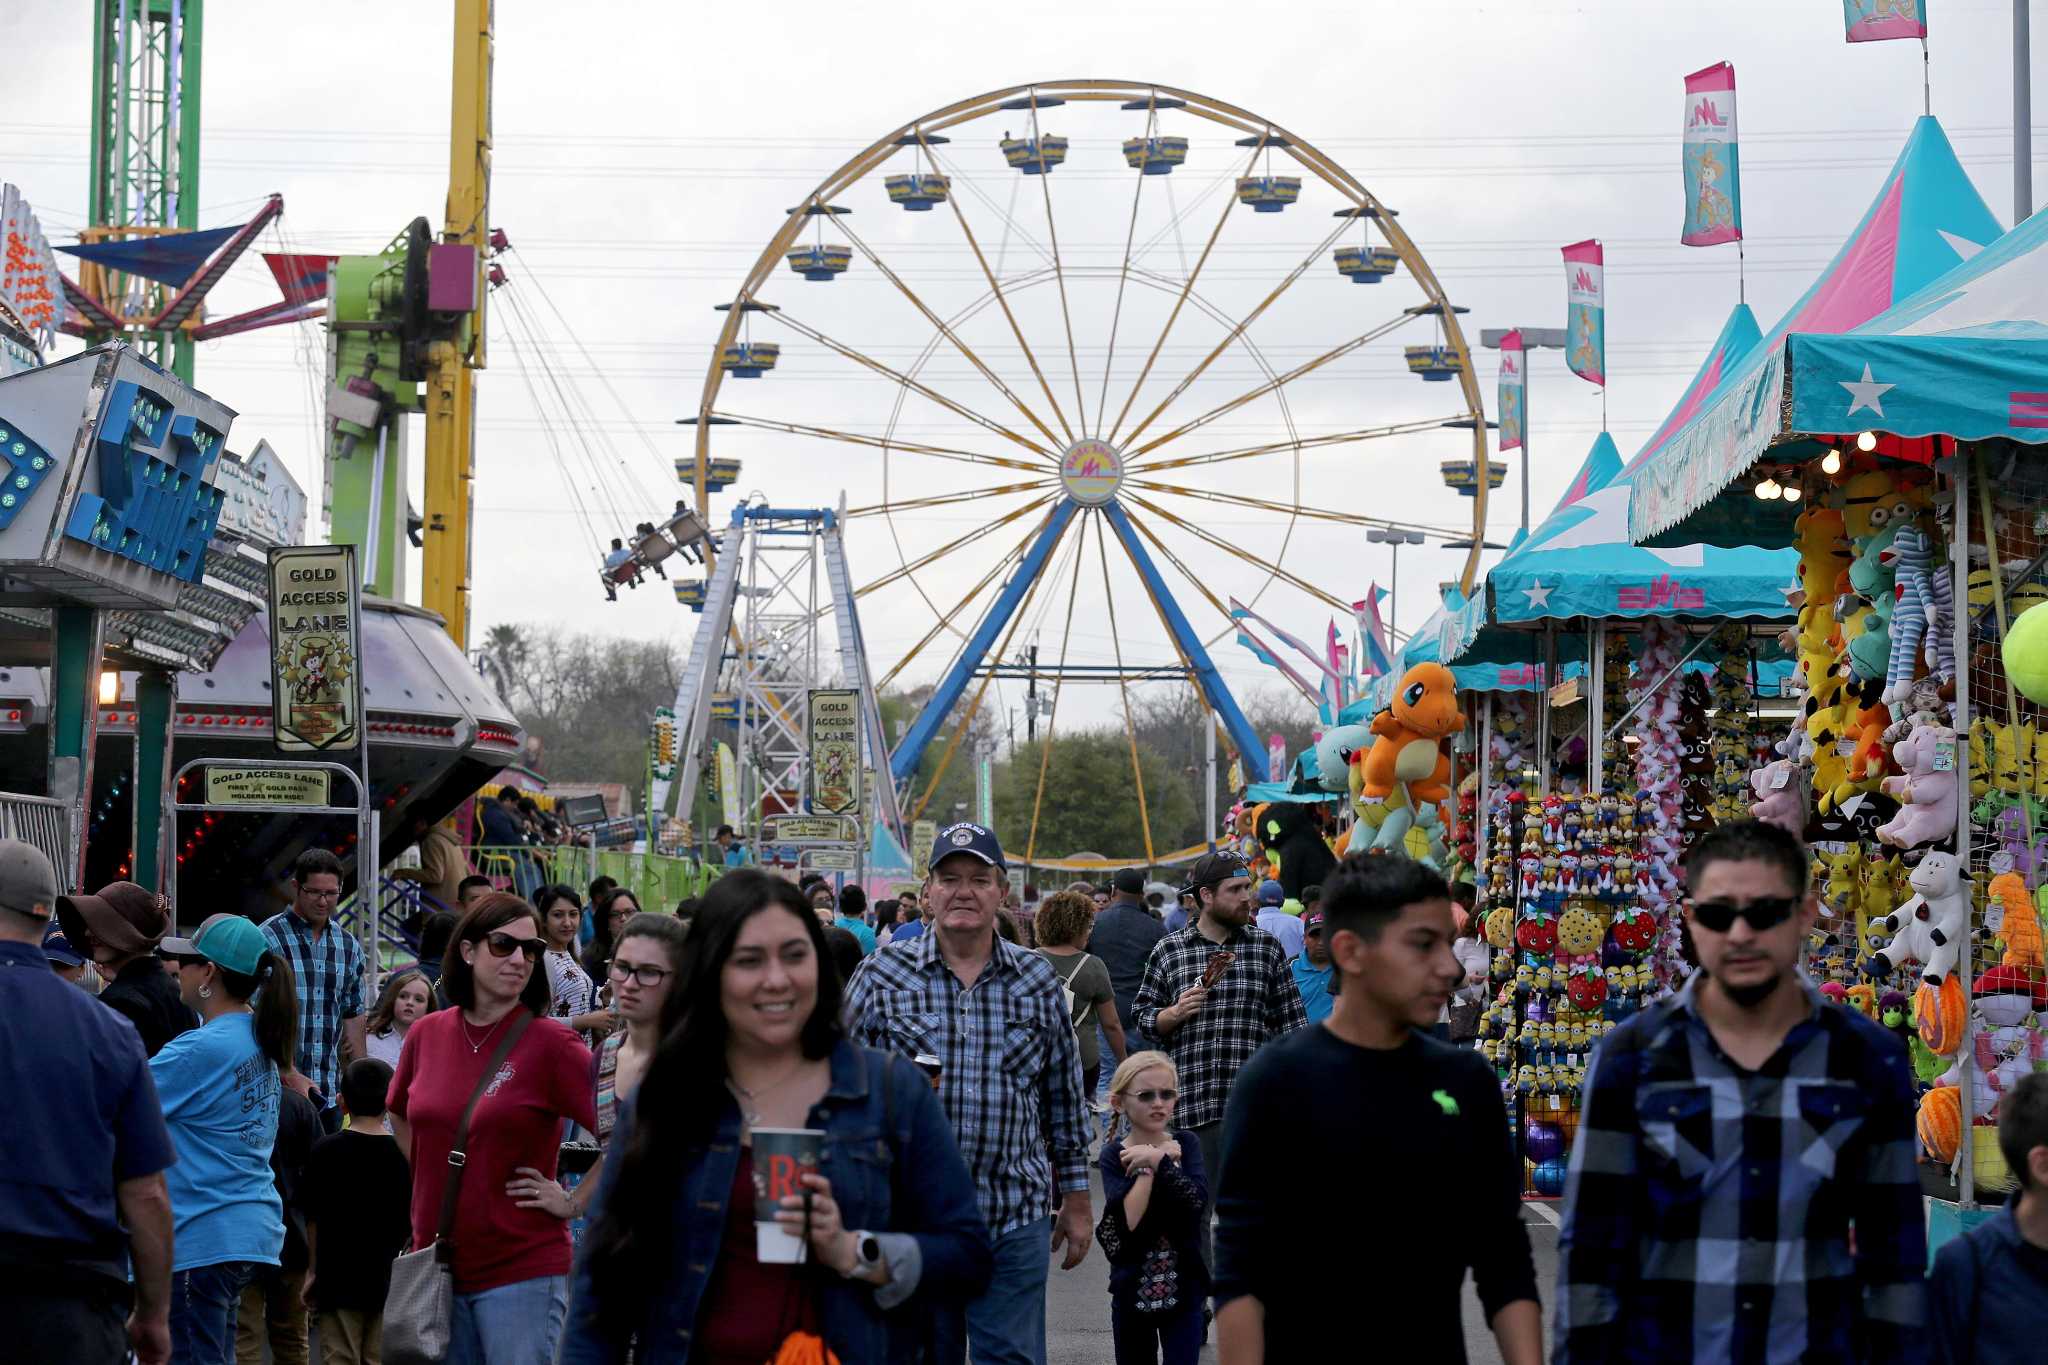 No Dollar Days for us. Rodeo cancels carnival for 2021